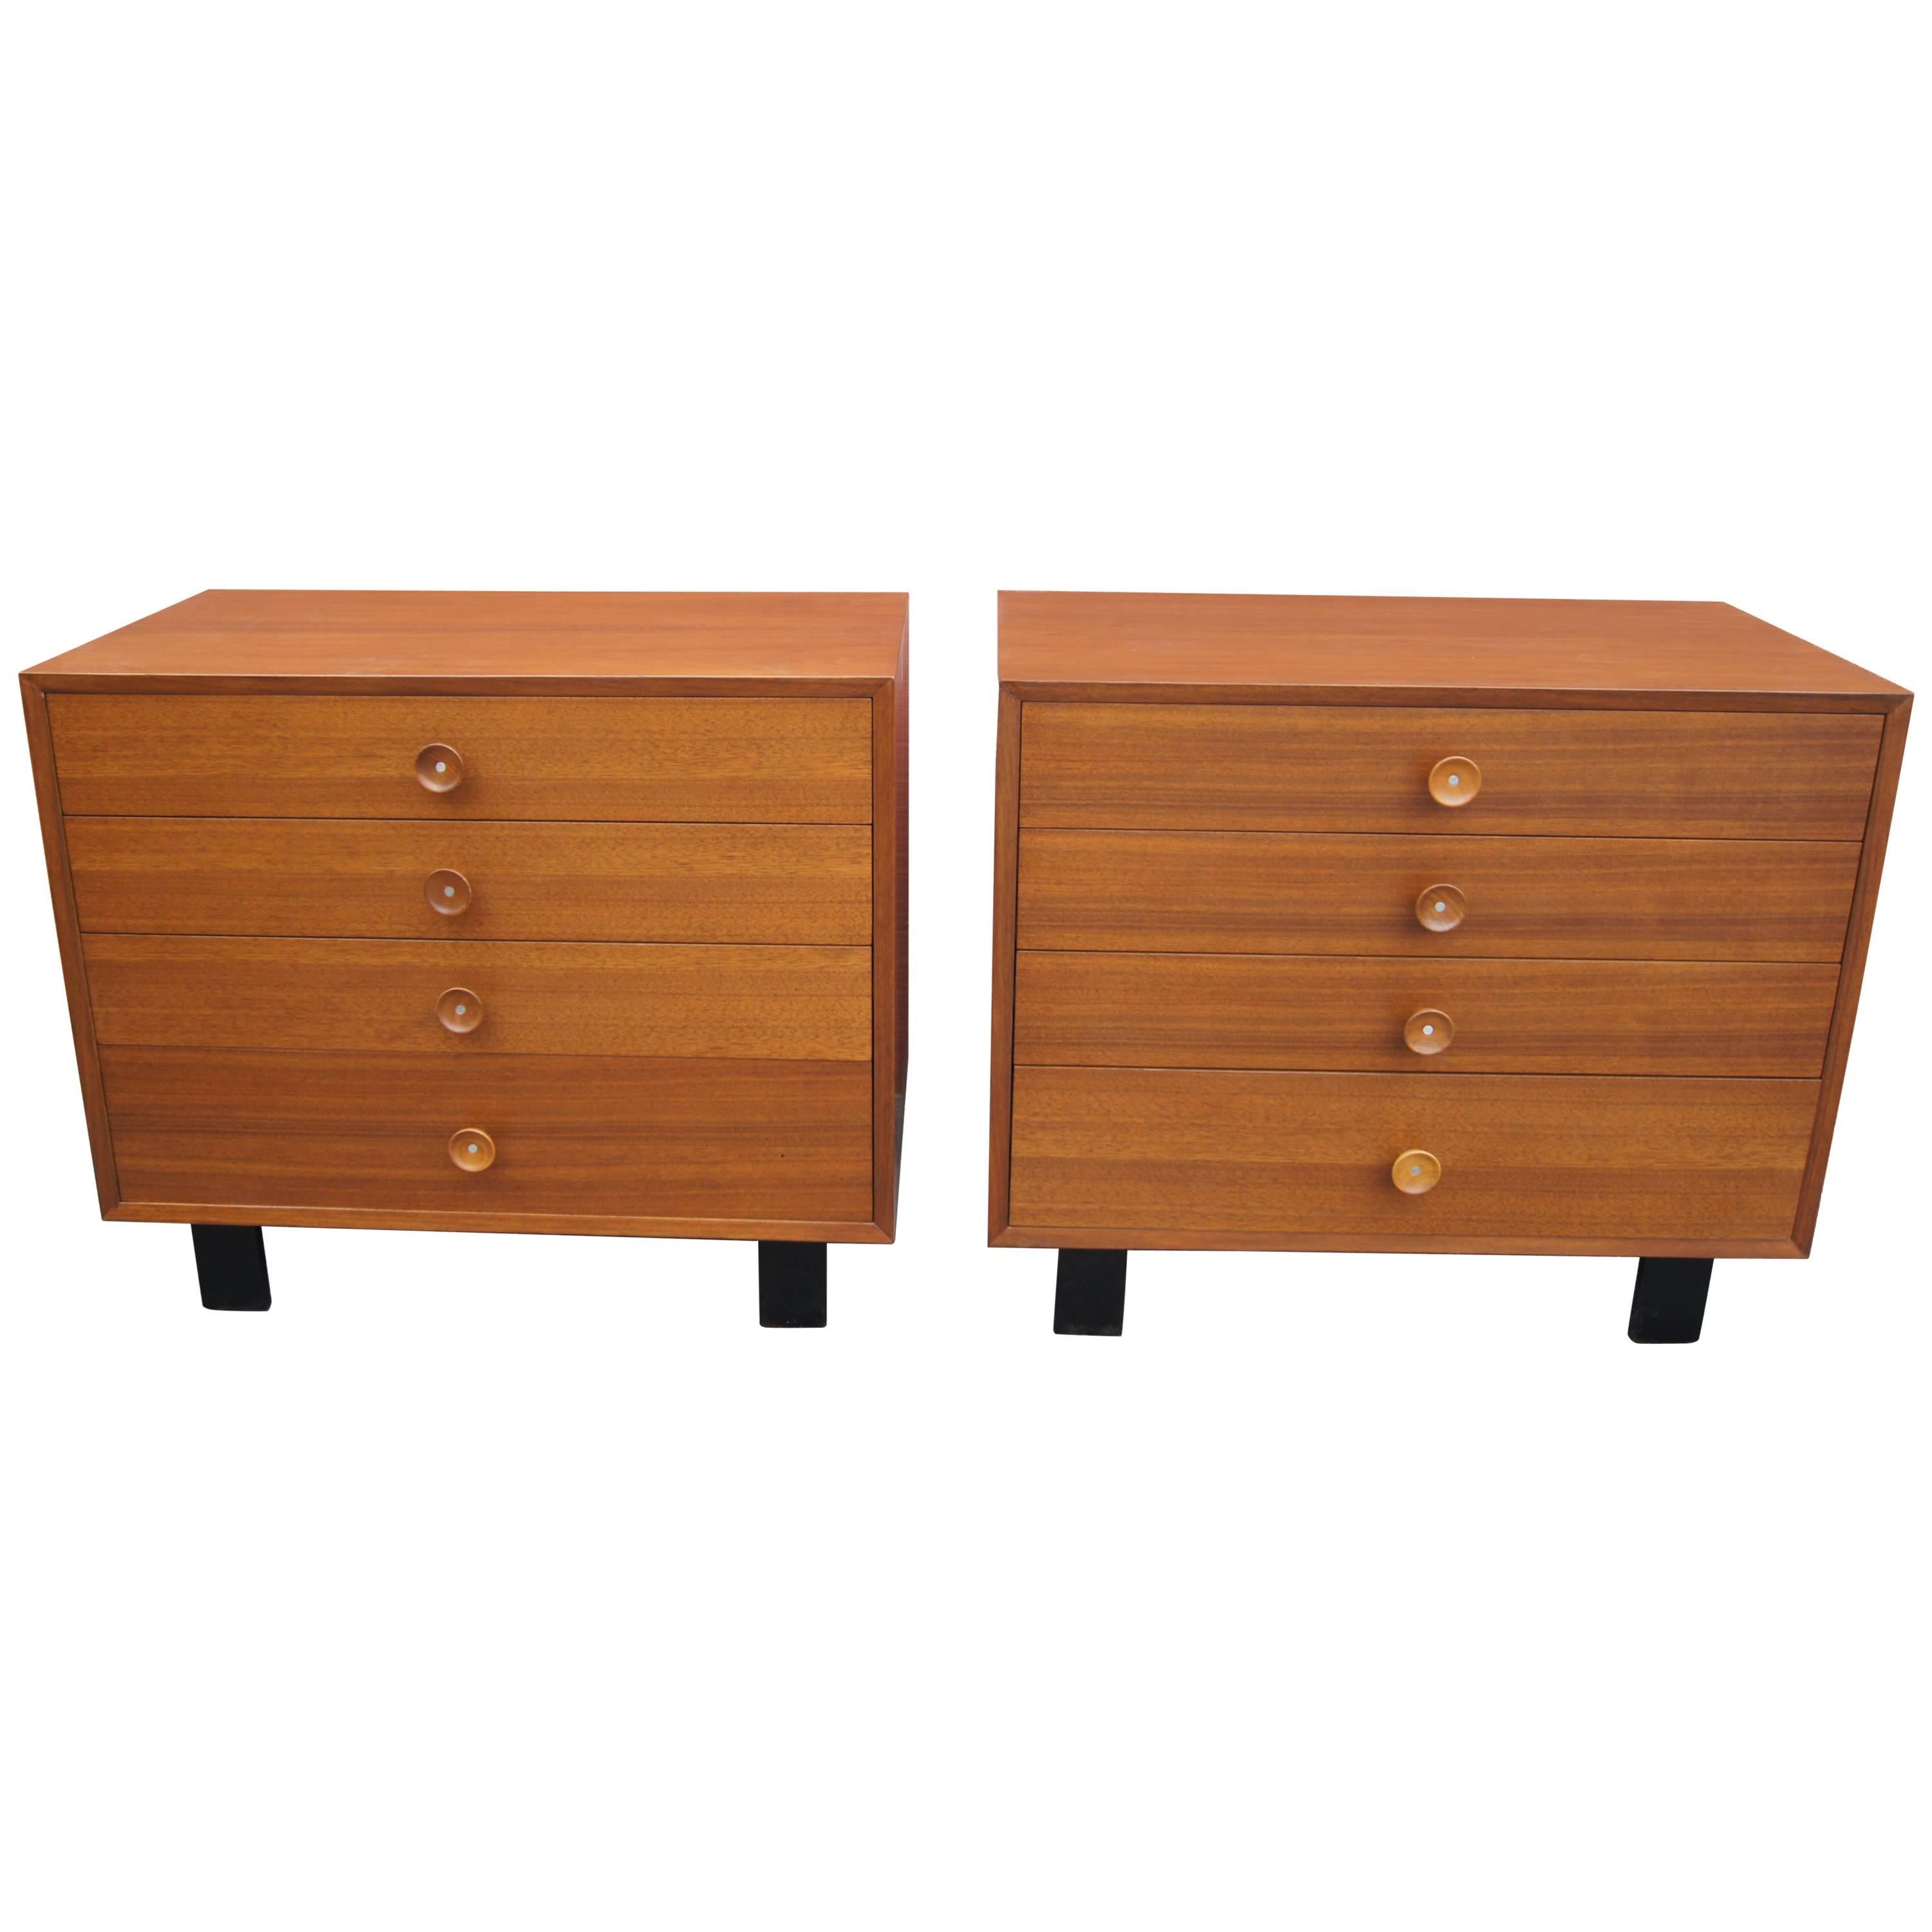 Pair of Walnut Dressers, Model 4606, by George Nelson for Herman Miller